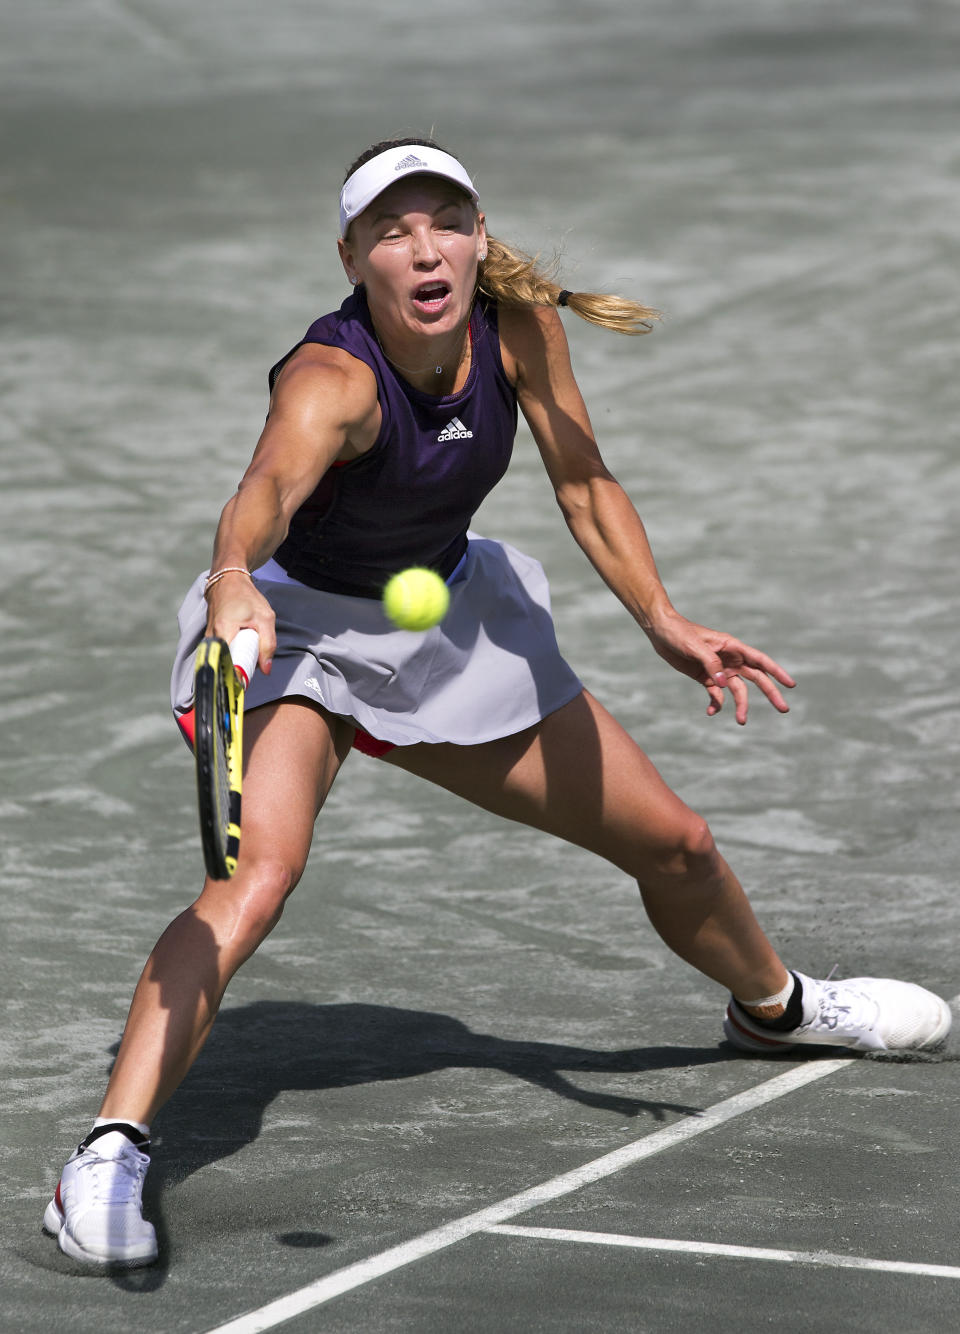 Caroline Wozniacki reaches for a shot from Mihaela Buzarnescu at the Volvo Car Open tennis tournament Thursday, April 4, 2019, in Charleston, S.C. (Grace Beahm Alford/The Post And Courier via AP)